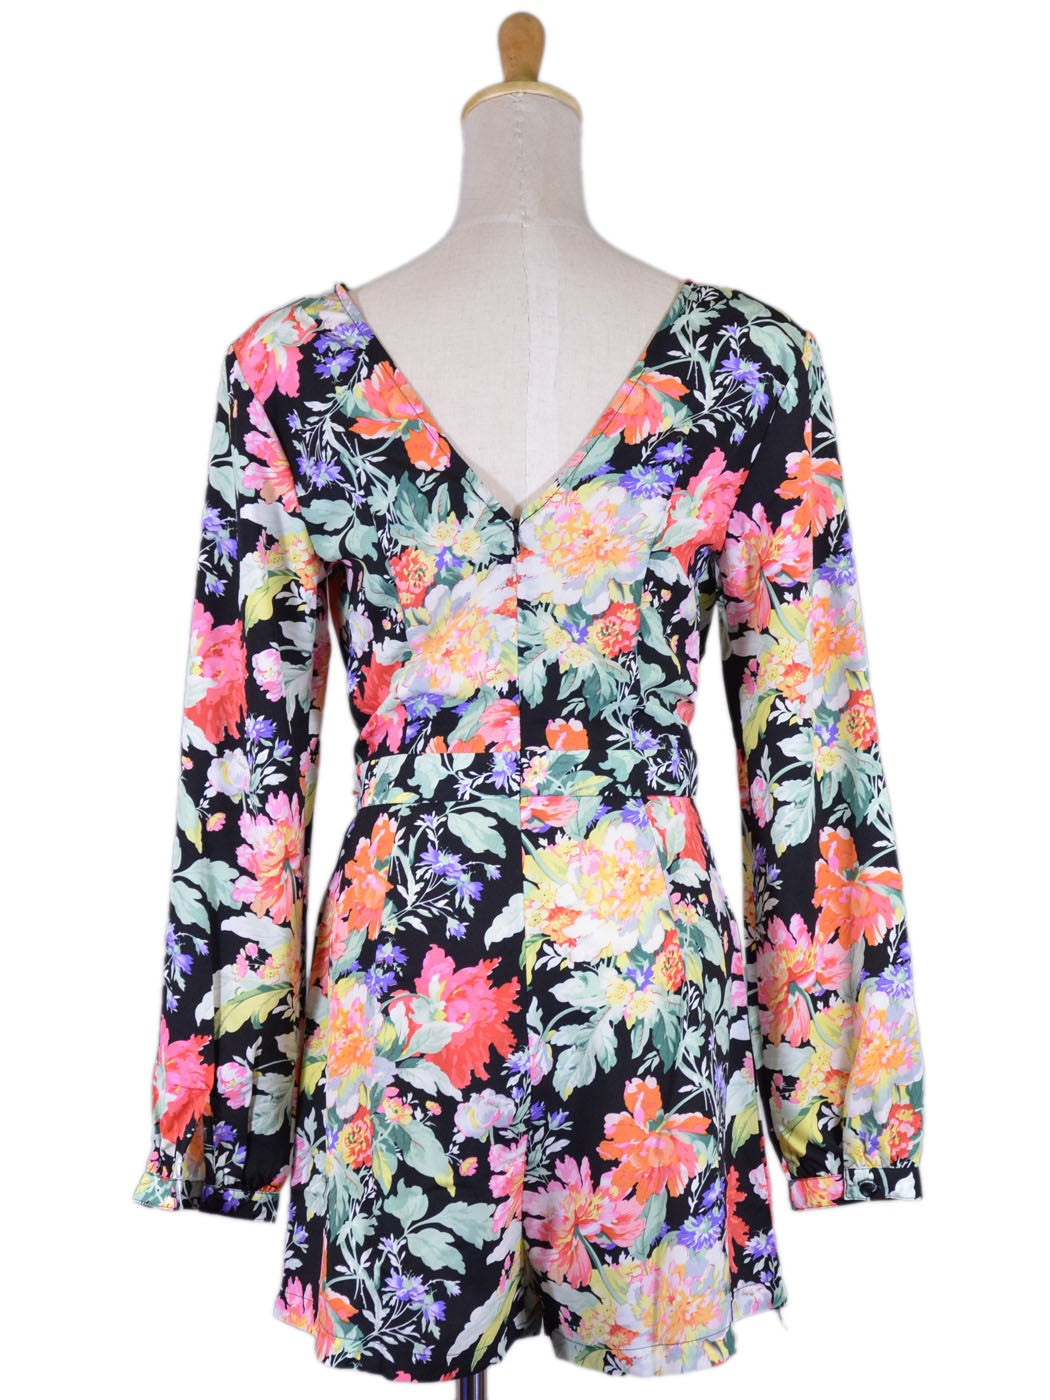 Uniq Beauteous Stunning Floral Print Padded Shoulder Long Sleeves Woven Romper